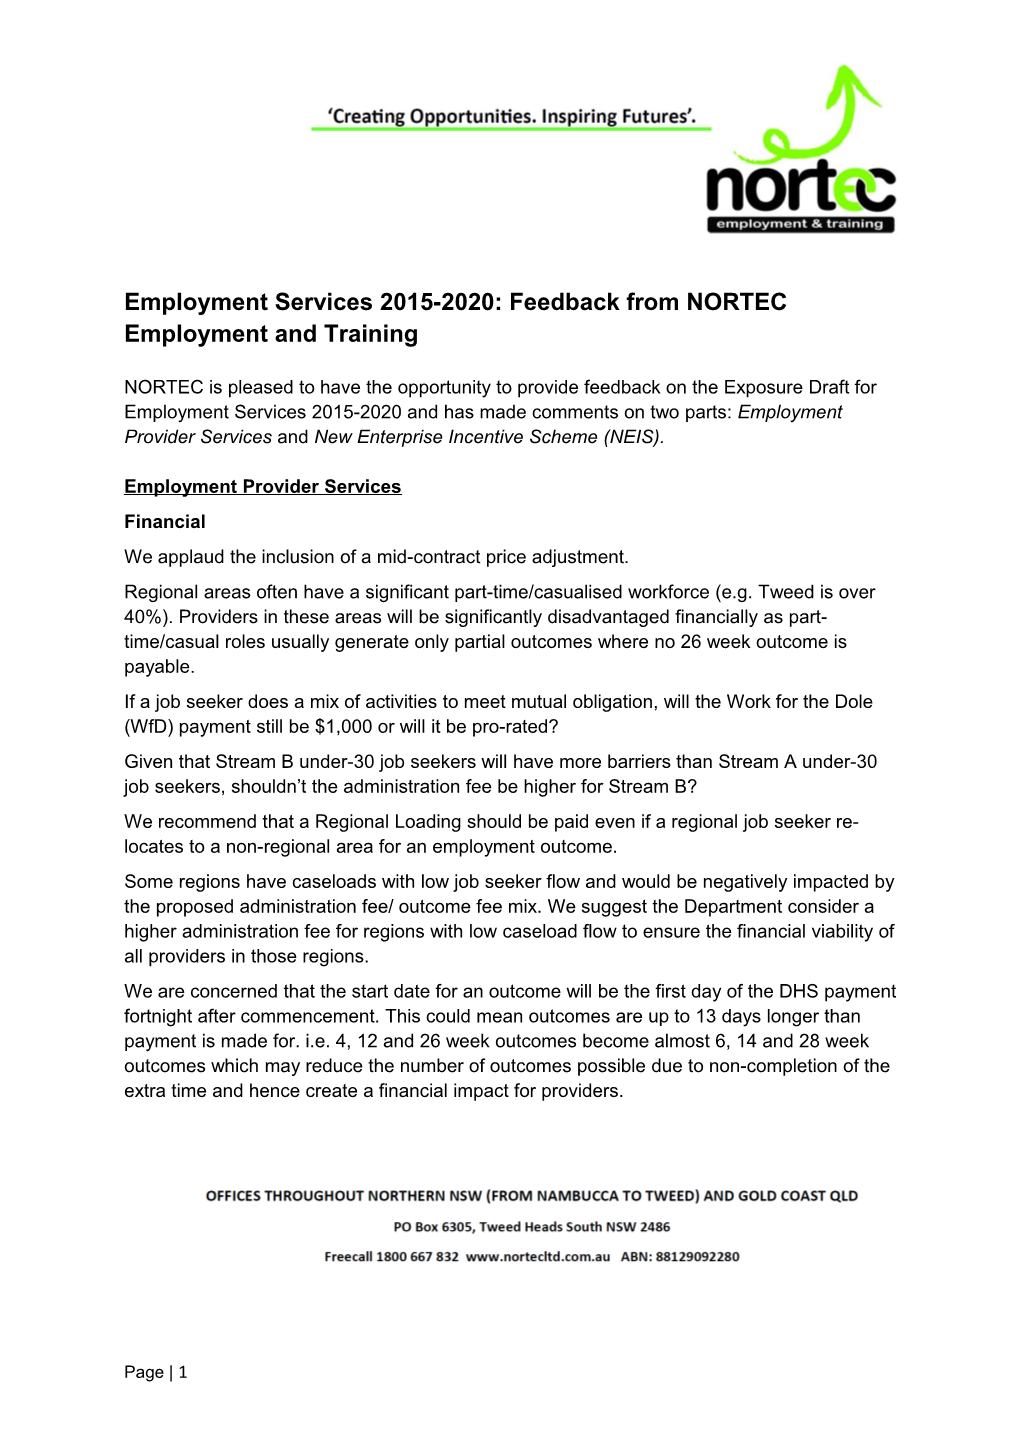 Employment Services 2015-2020:Feedback from NORTEC Employment and Training